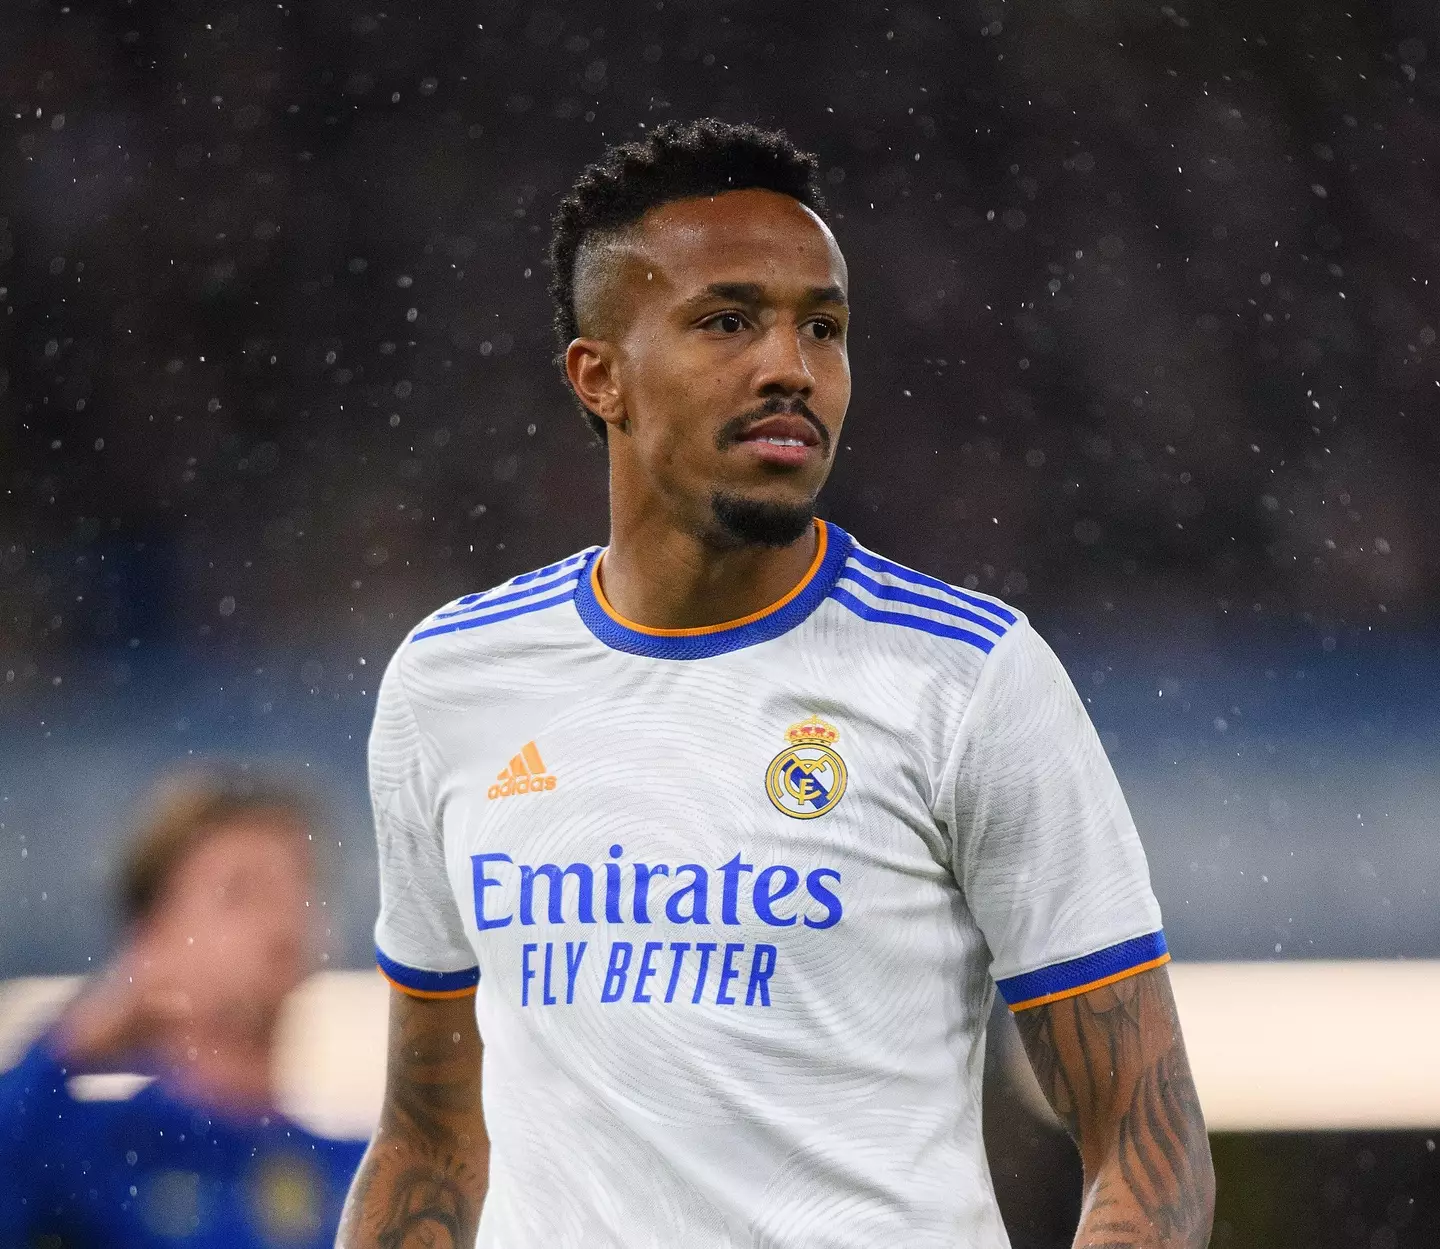 Militao has also been rewarded with a new contract (Image: Alamy)